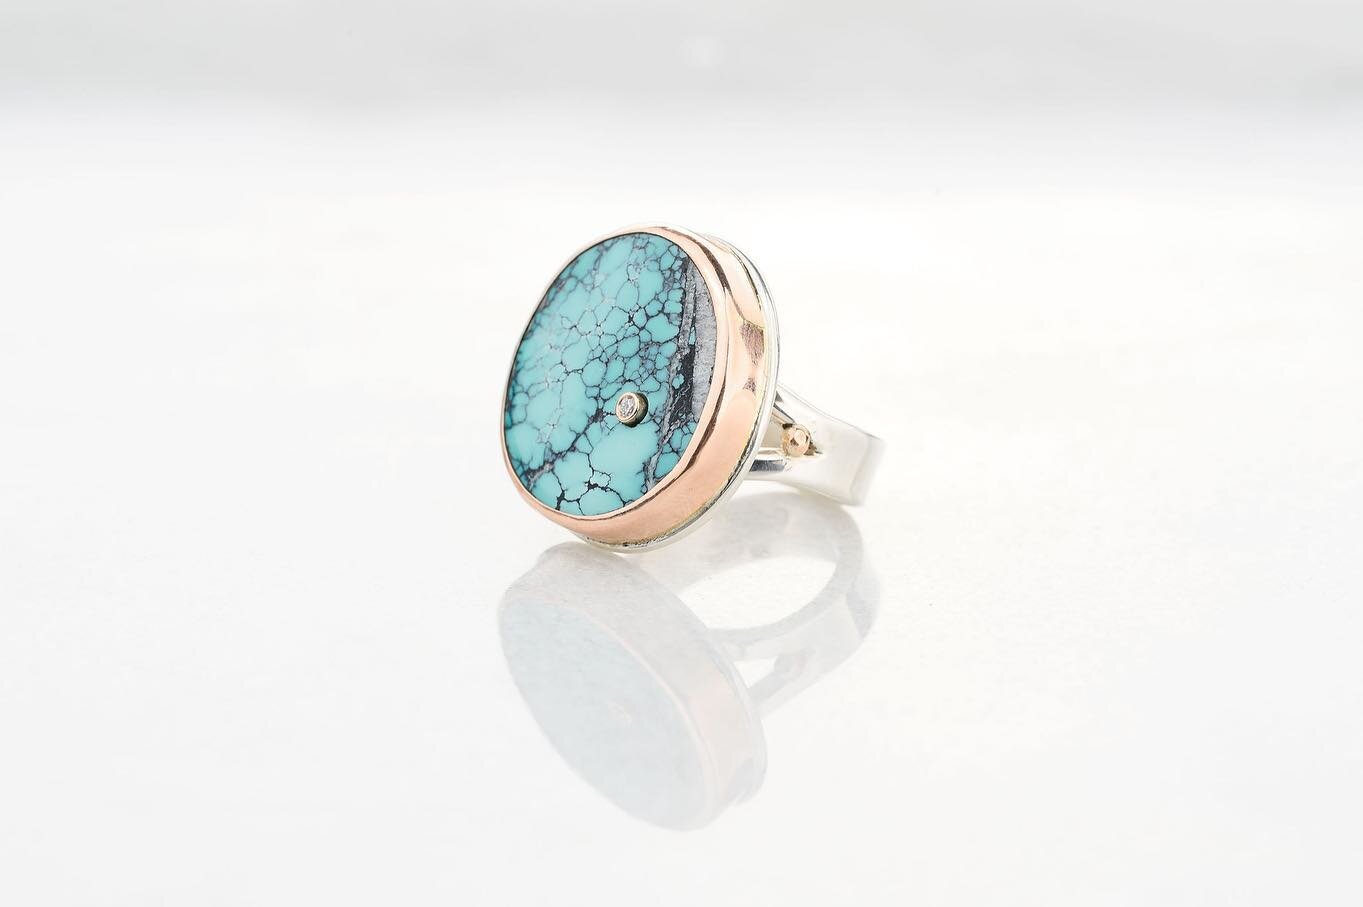 Big and Beautiful. Robin&rsquo;s egg blue turquoise surrounded by warm rose gold. This is your new statement ring. 👊🏼🦋 #ariojewelry #turquoisering #ooakjewelry #artisanjewelry #mixedmetaljewelry #rosegoldring #bohojewelry #bohochicjewelry #artisan